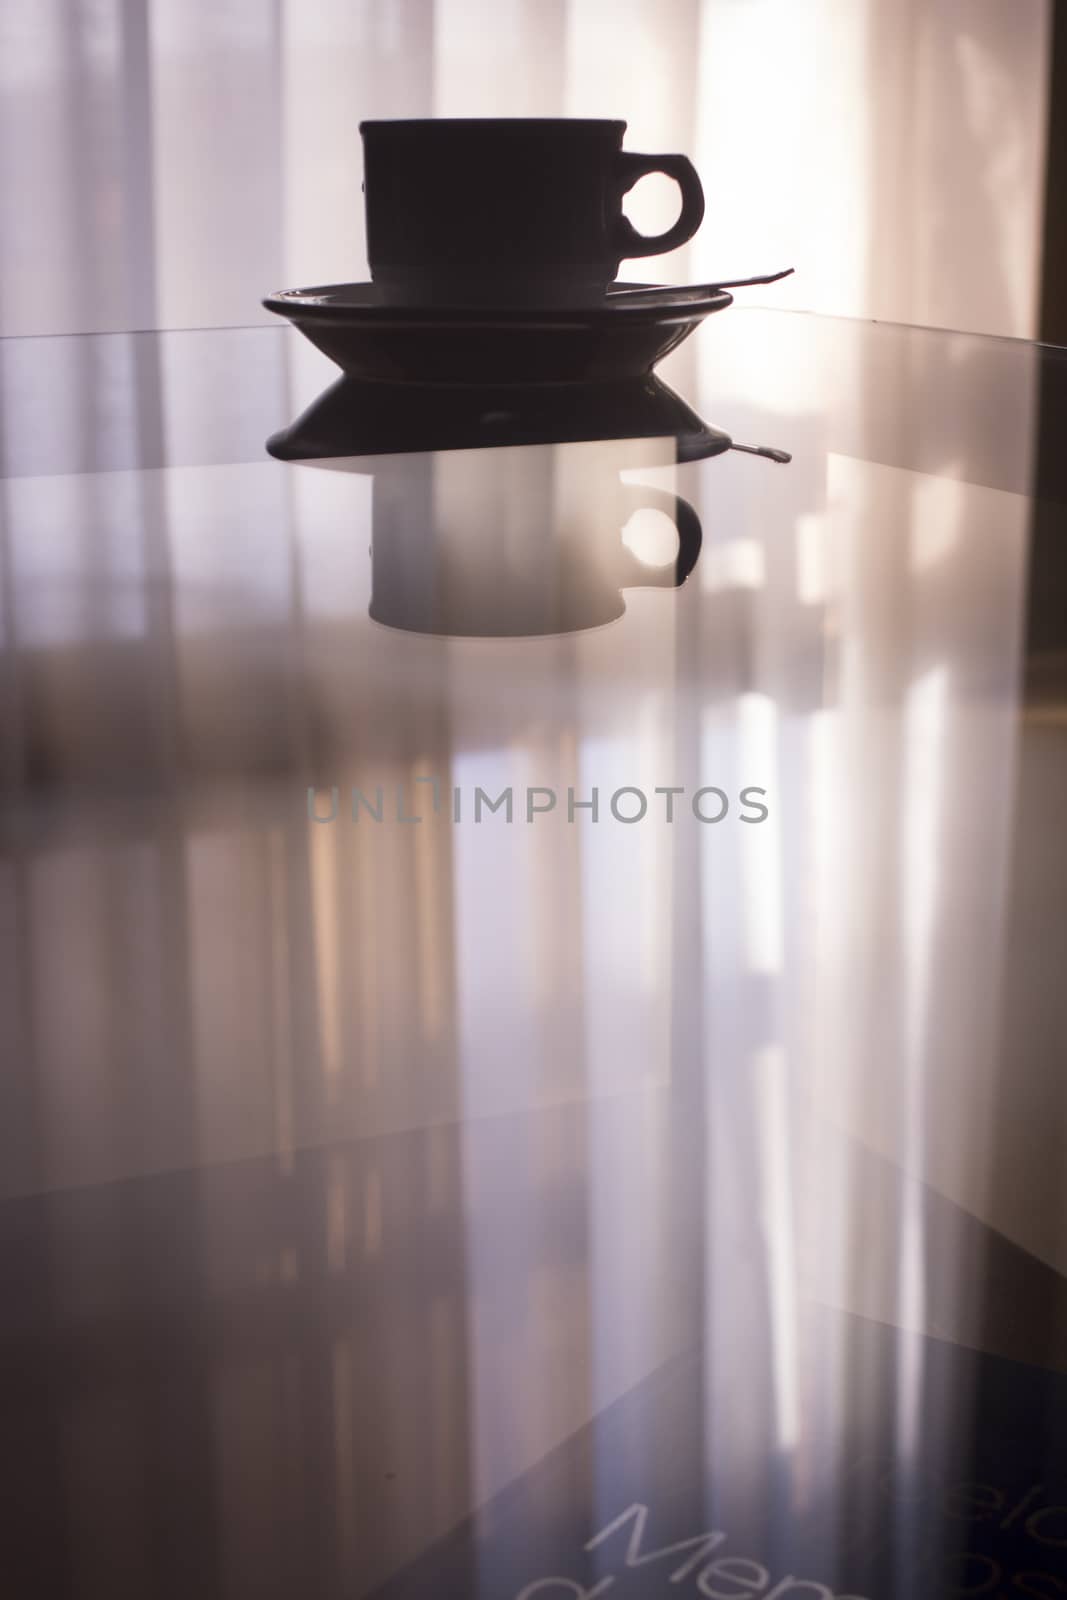 Tea or coffee cup and saucer on table silhouette by edwardolive